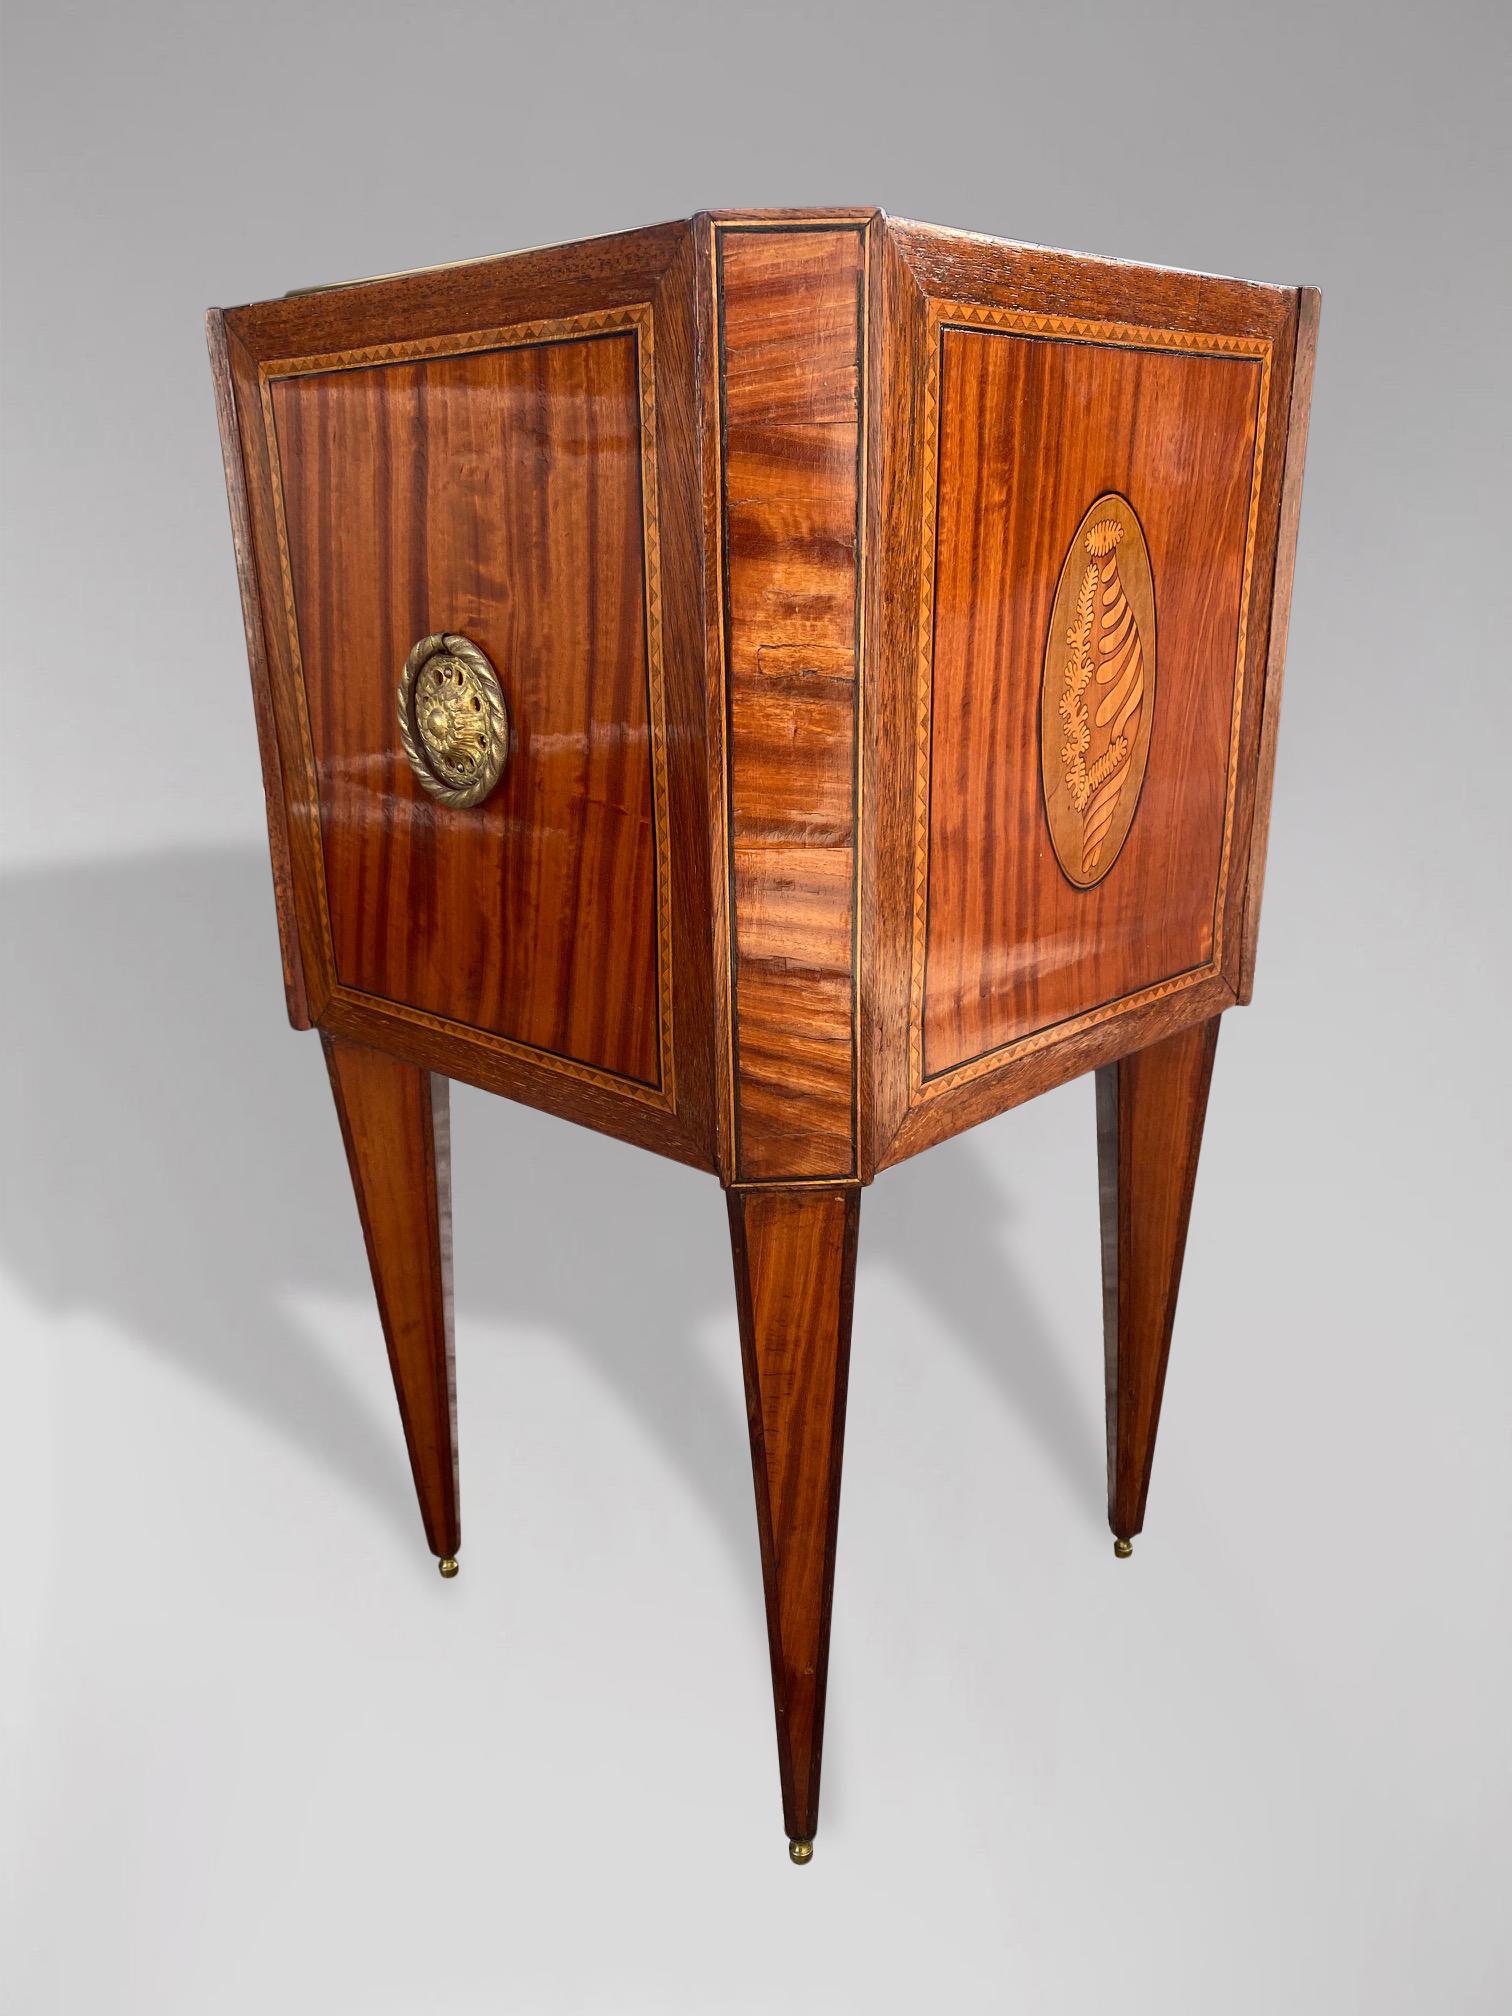 Very attractive early 20th century, Edwardian Period mahogany and marquetry jardinière or plant stand with satinwood inlays and original brass handles, standing on inlaid tapered legs terminating in ball feet. Original separate brass liner also with